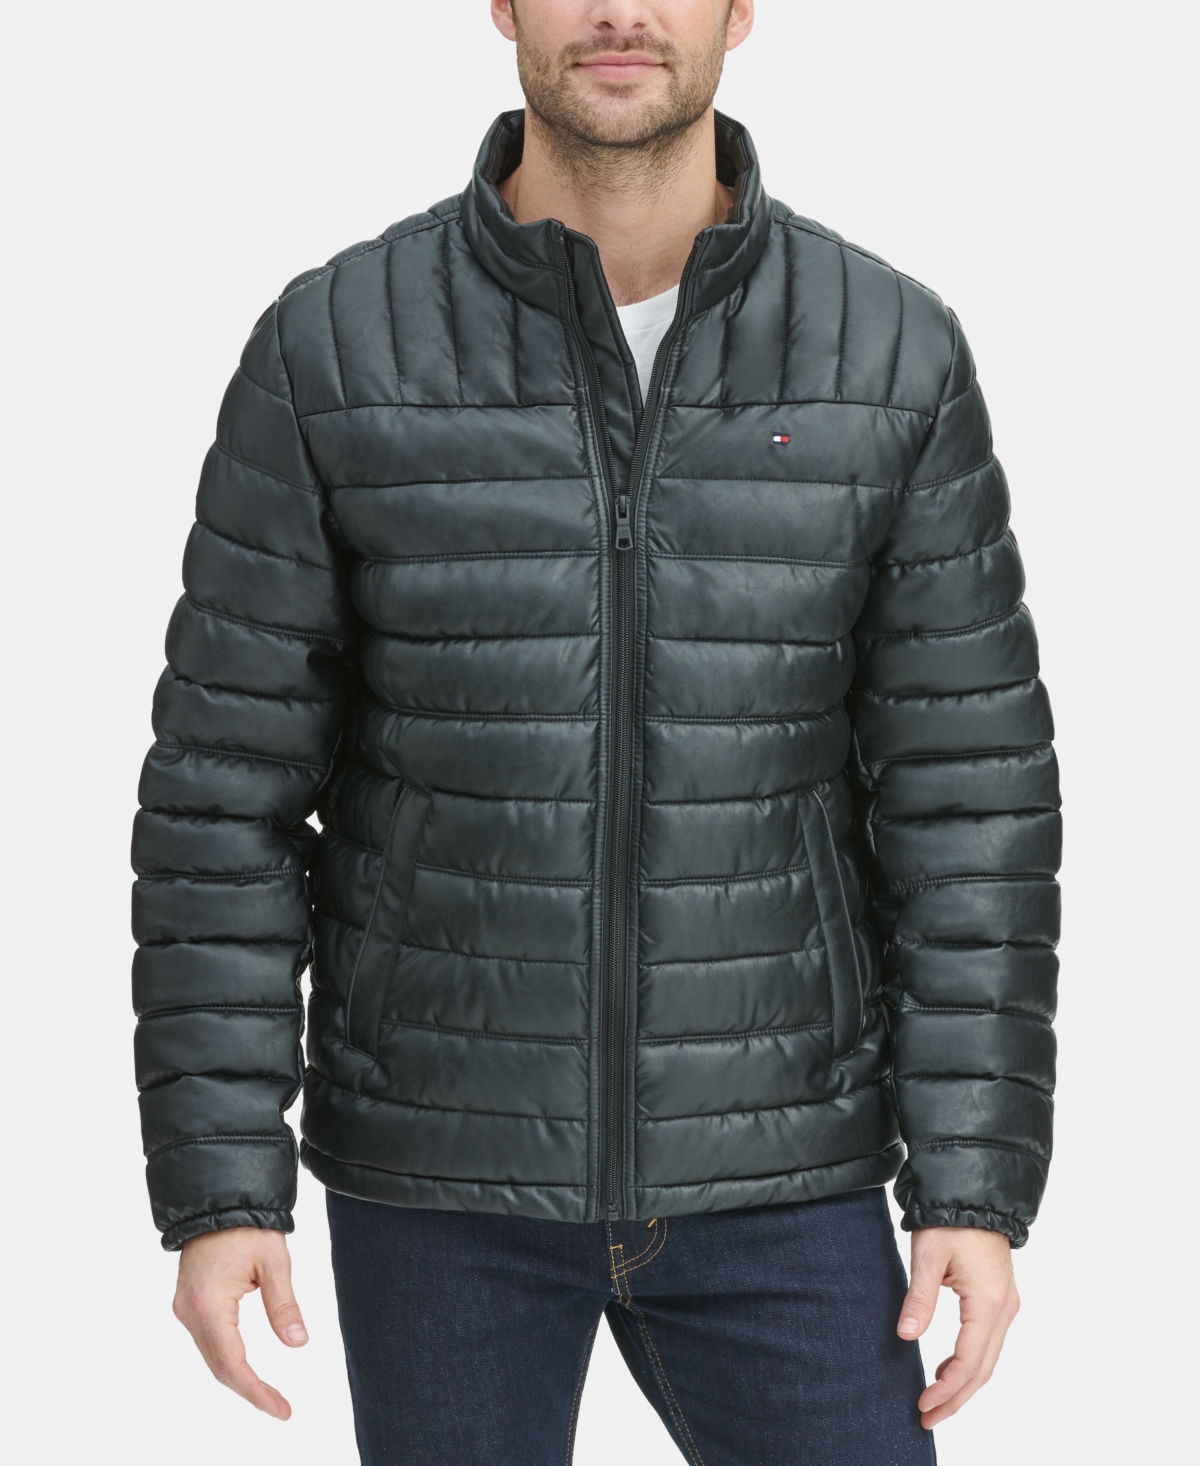 Tommy Hilfiger Men's Quilted Faux Leather Puffer Jacket